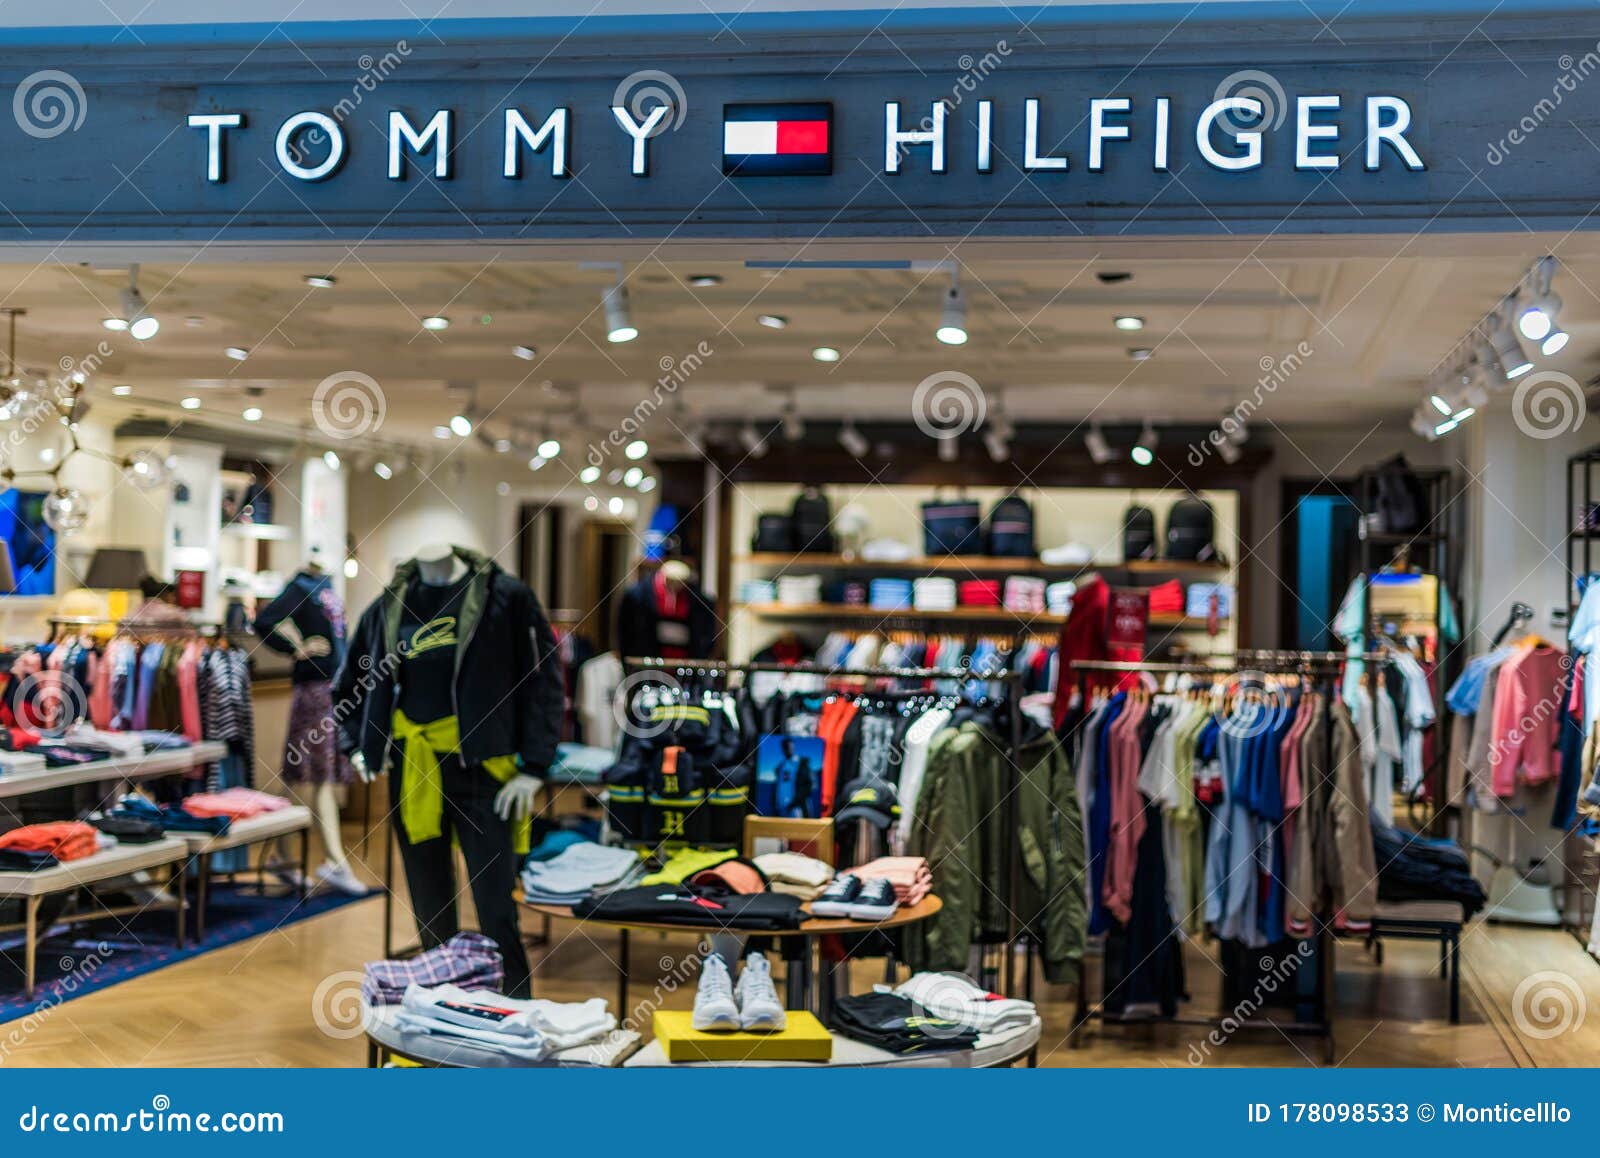 tommy hilfiger outlet mall near me